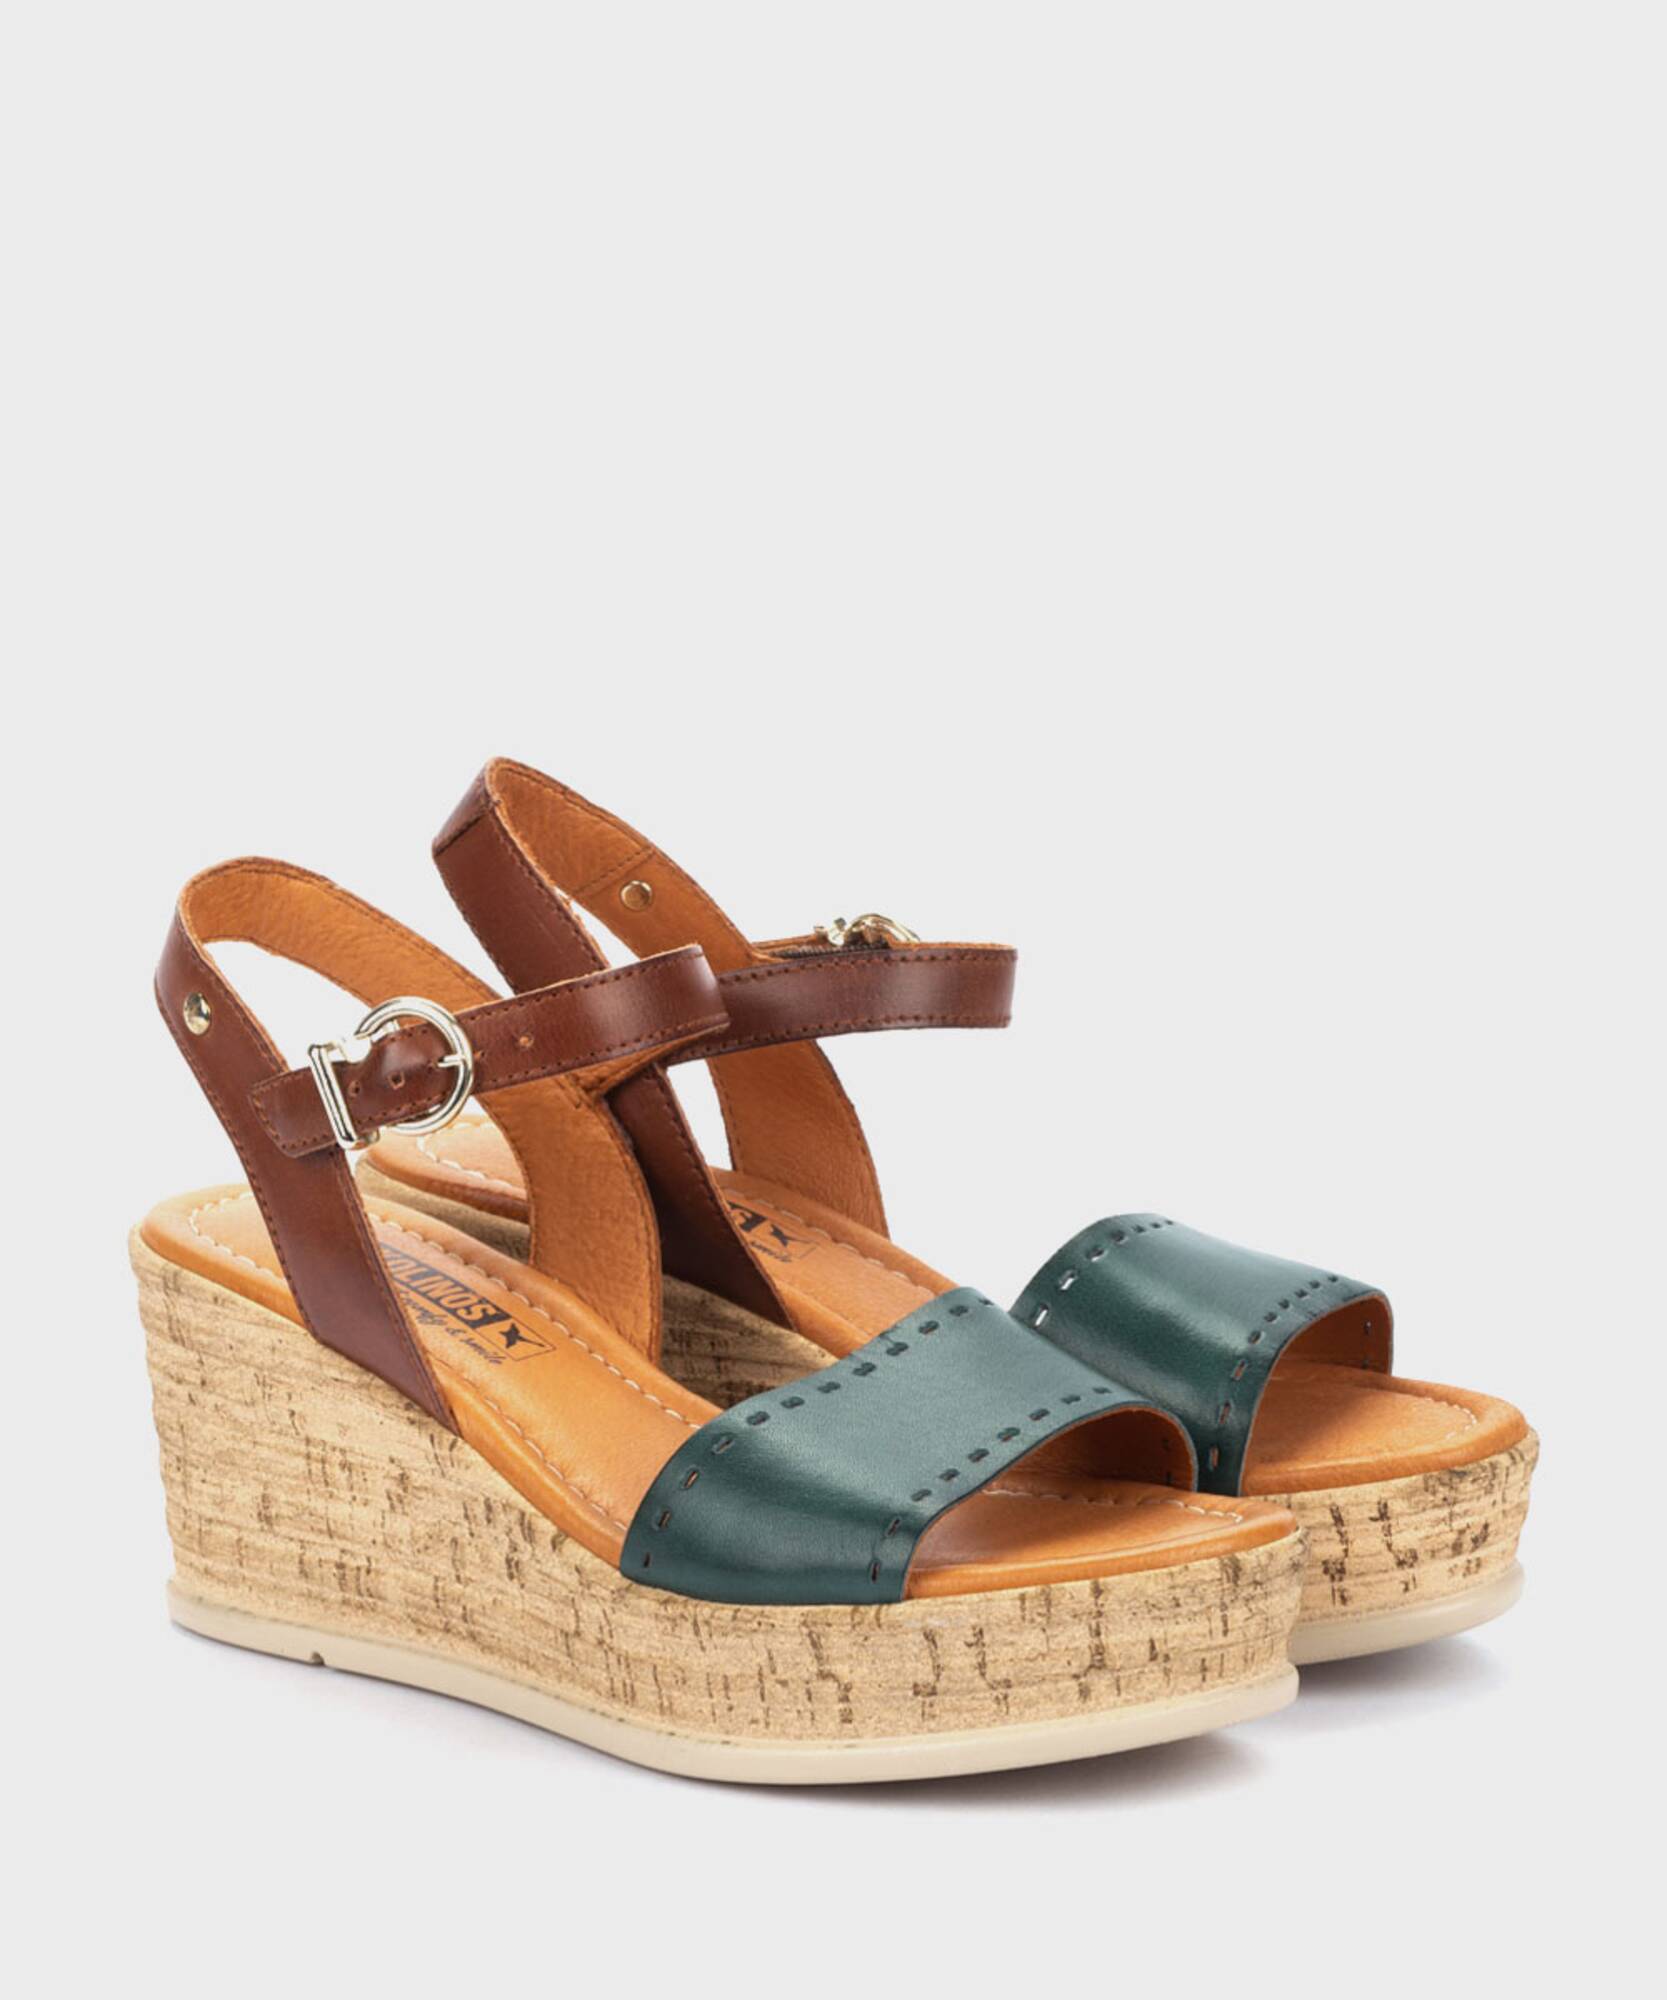 Sandals and Clogs | MIRANDA W2F-1843C1, , large image number 21 | null